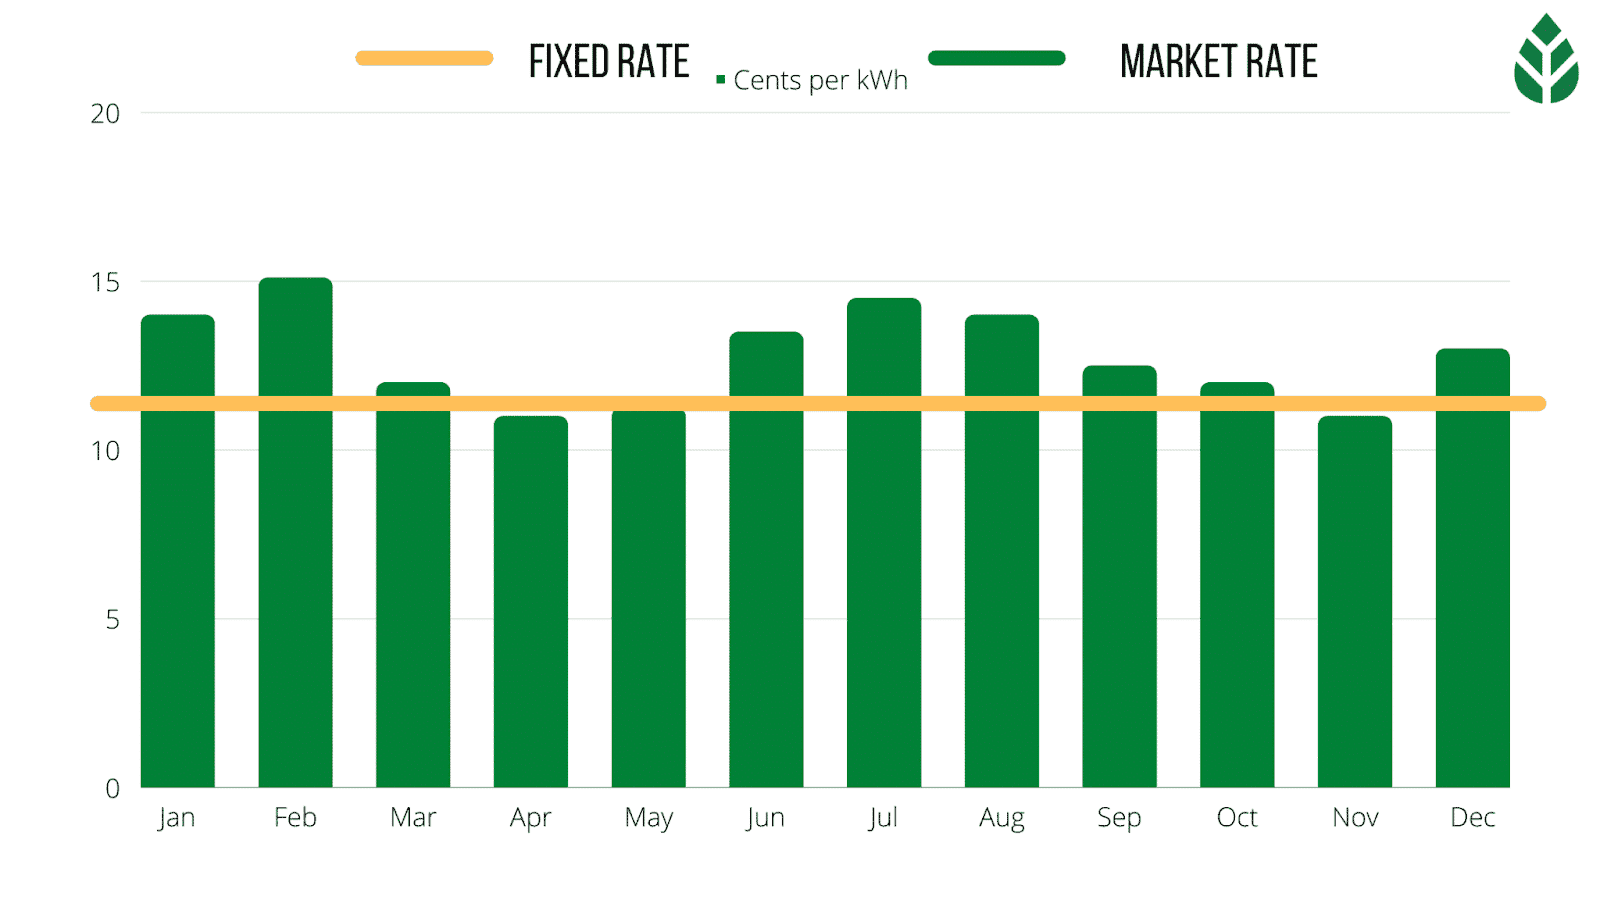 Fixed Rate vs Market Rate Electricity Rates in Dallas by Month